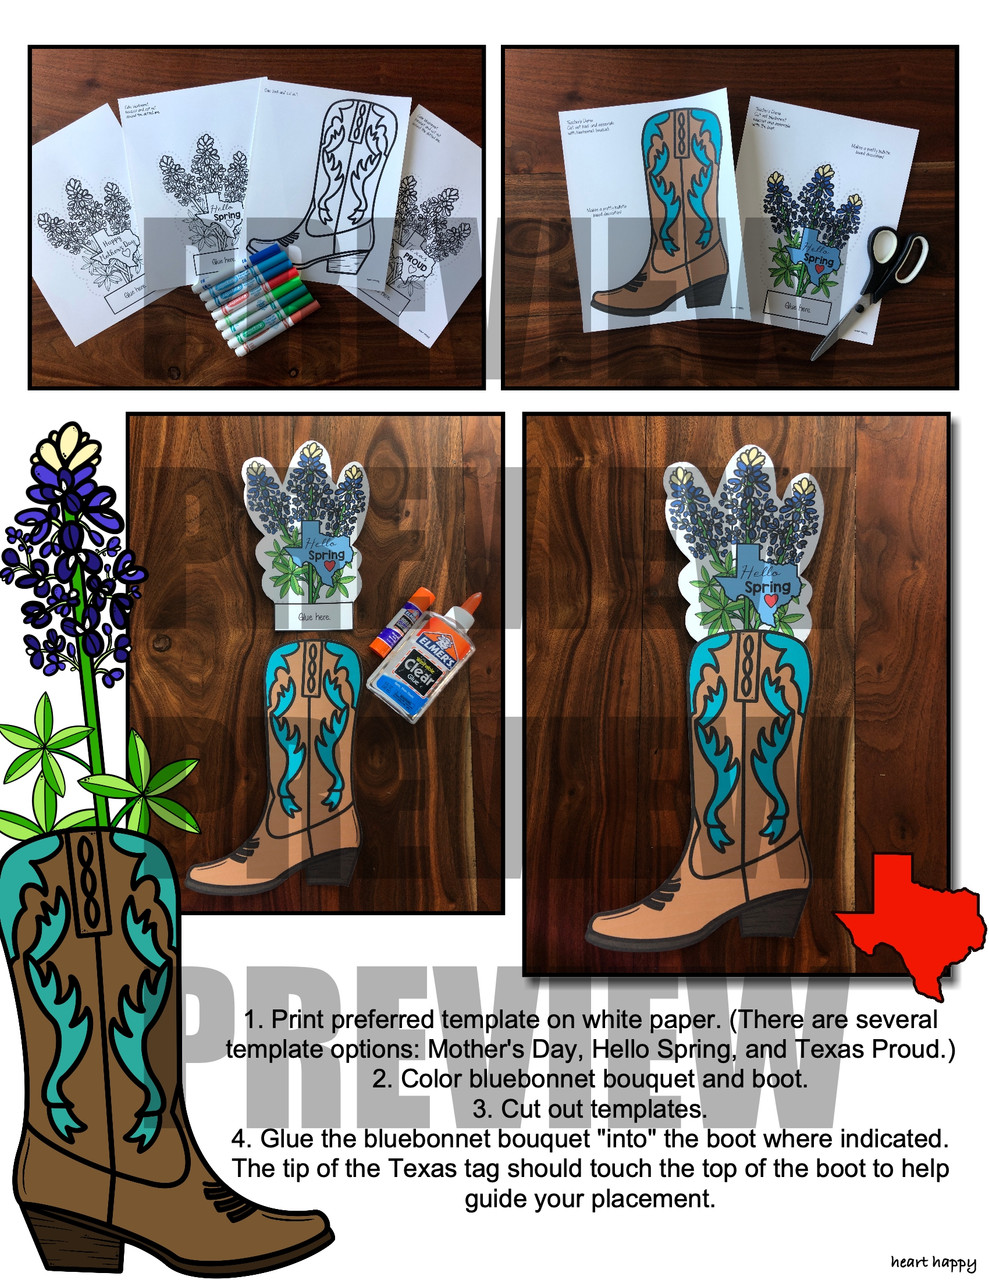 Bluebonnets in Boots Craft | Texas Craft | Spring Craft | Mother's Day Craft 